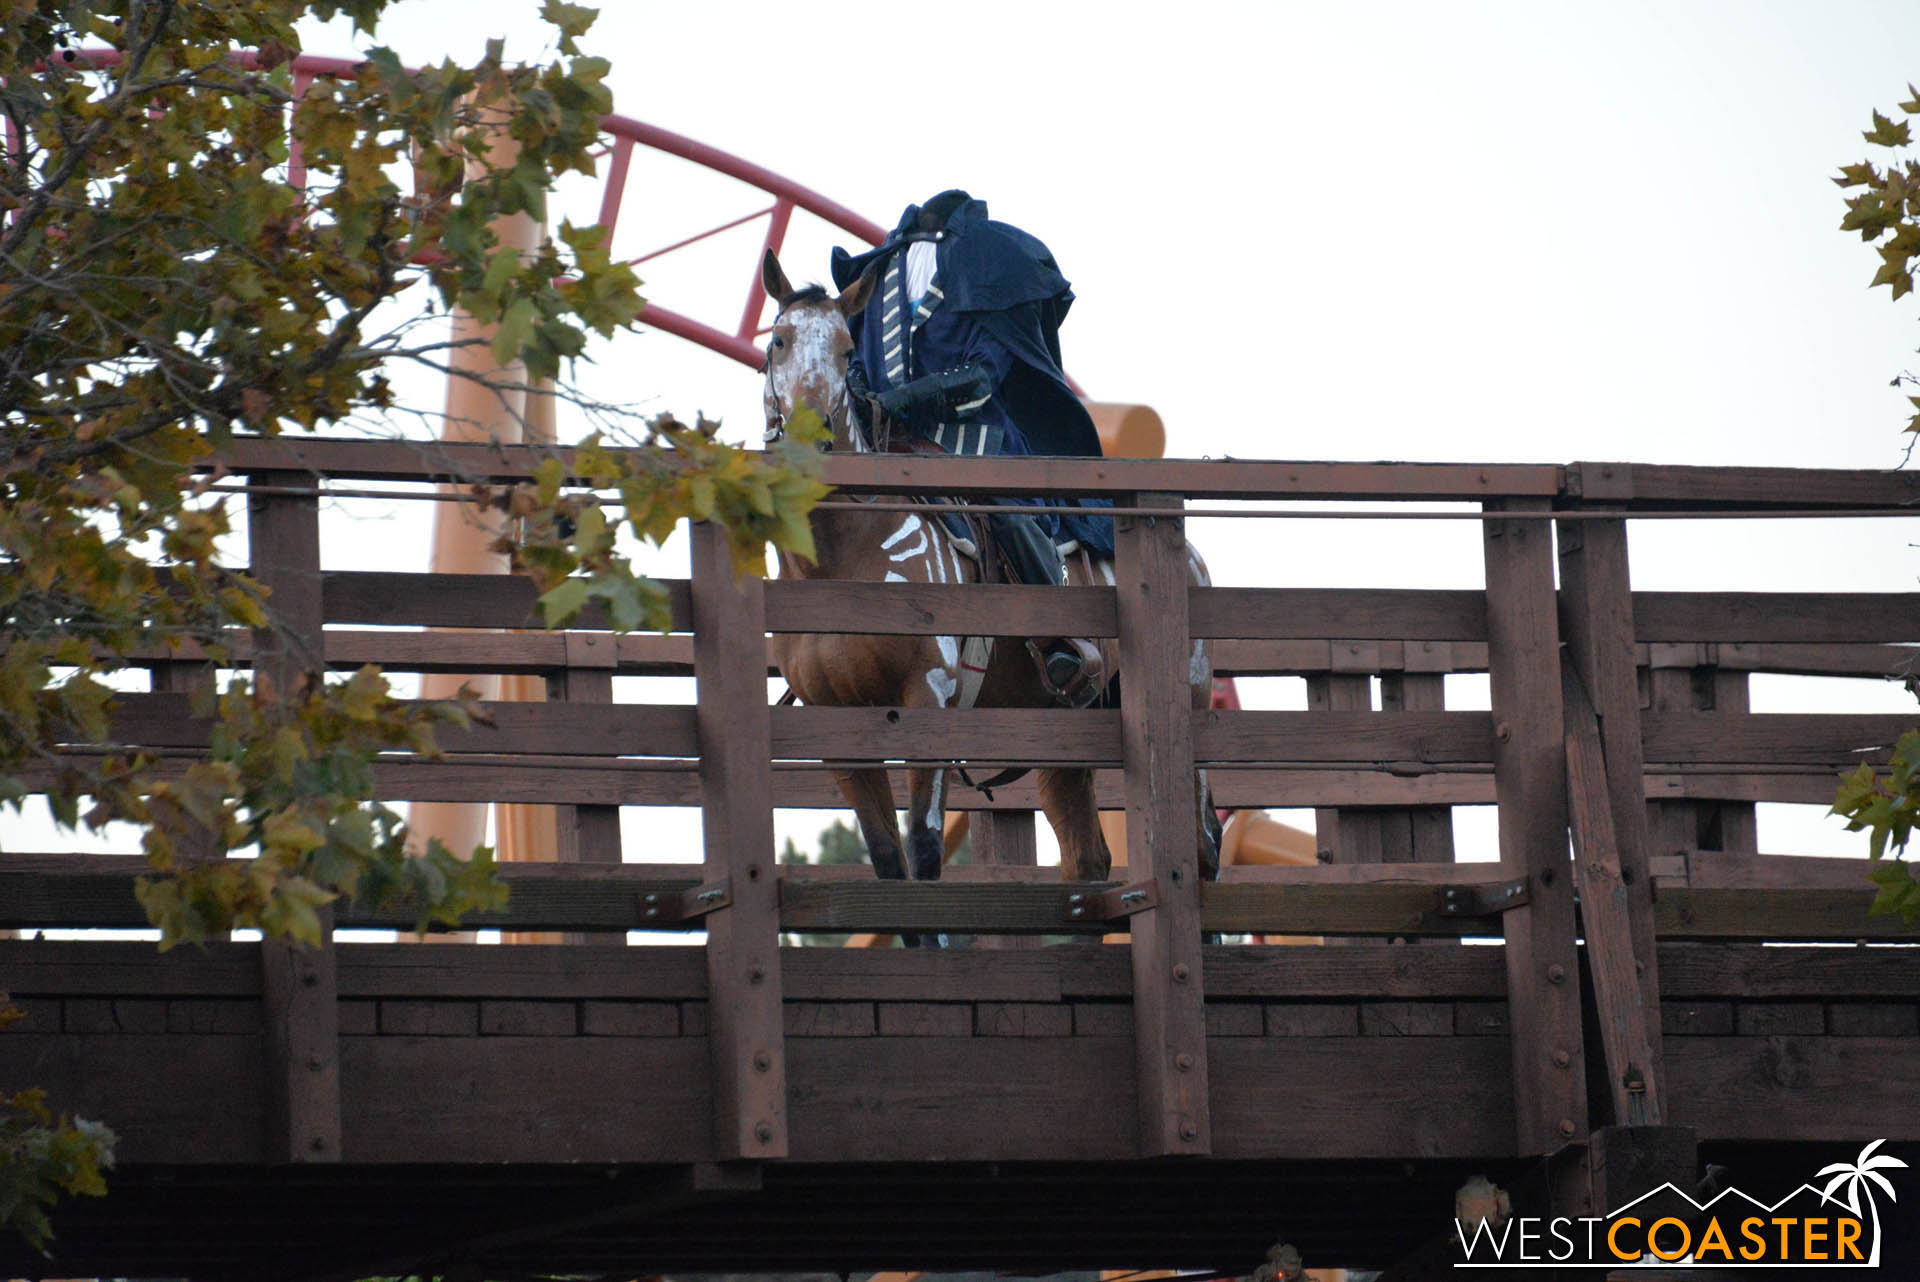  And before the event begins, the Headless Horseman takes a trot over the Stagecoach bridge to observe the evening's victims--er, guests. 